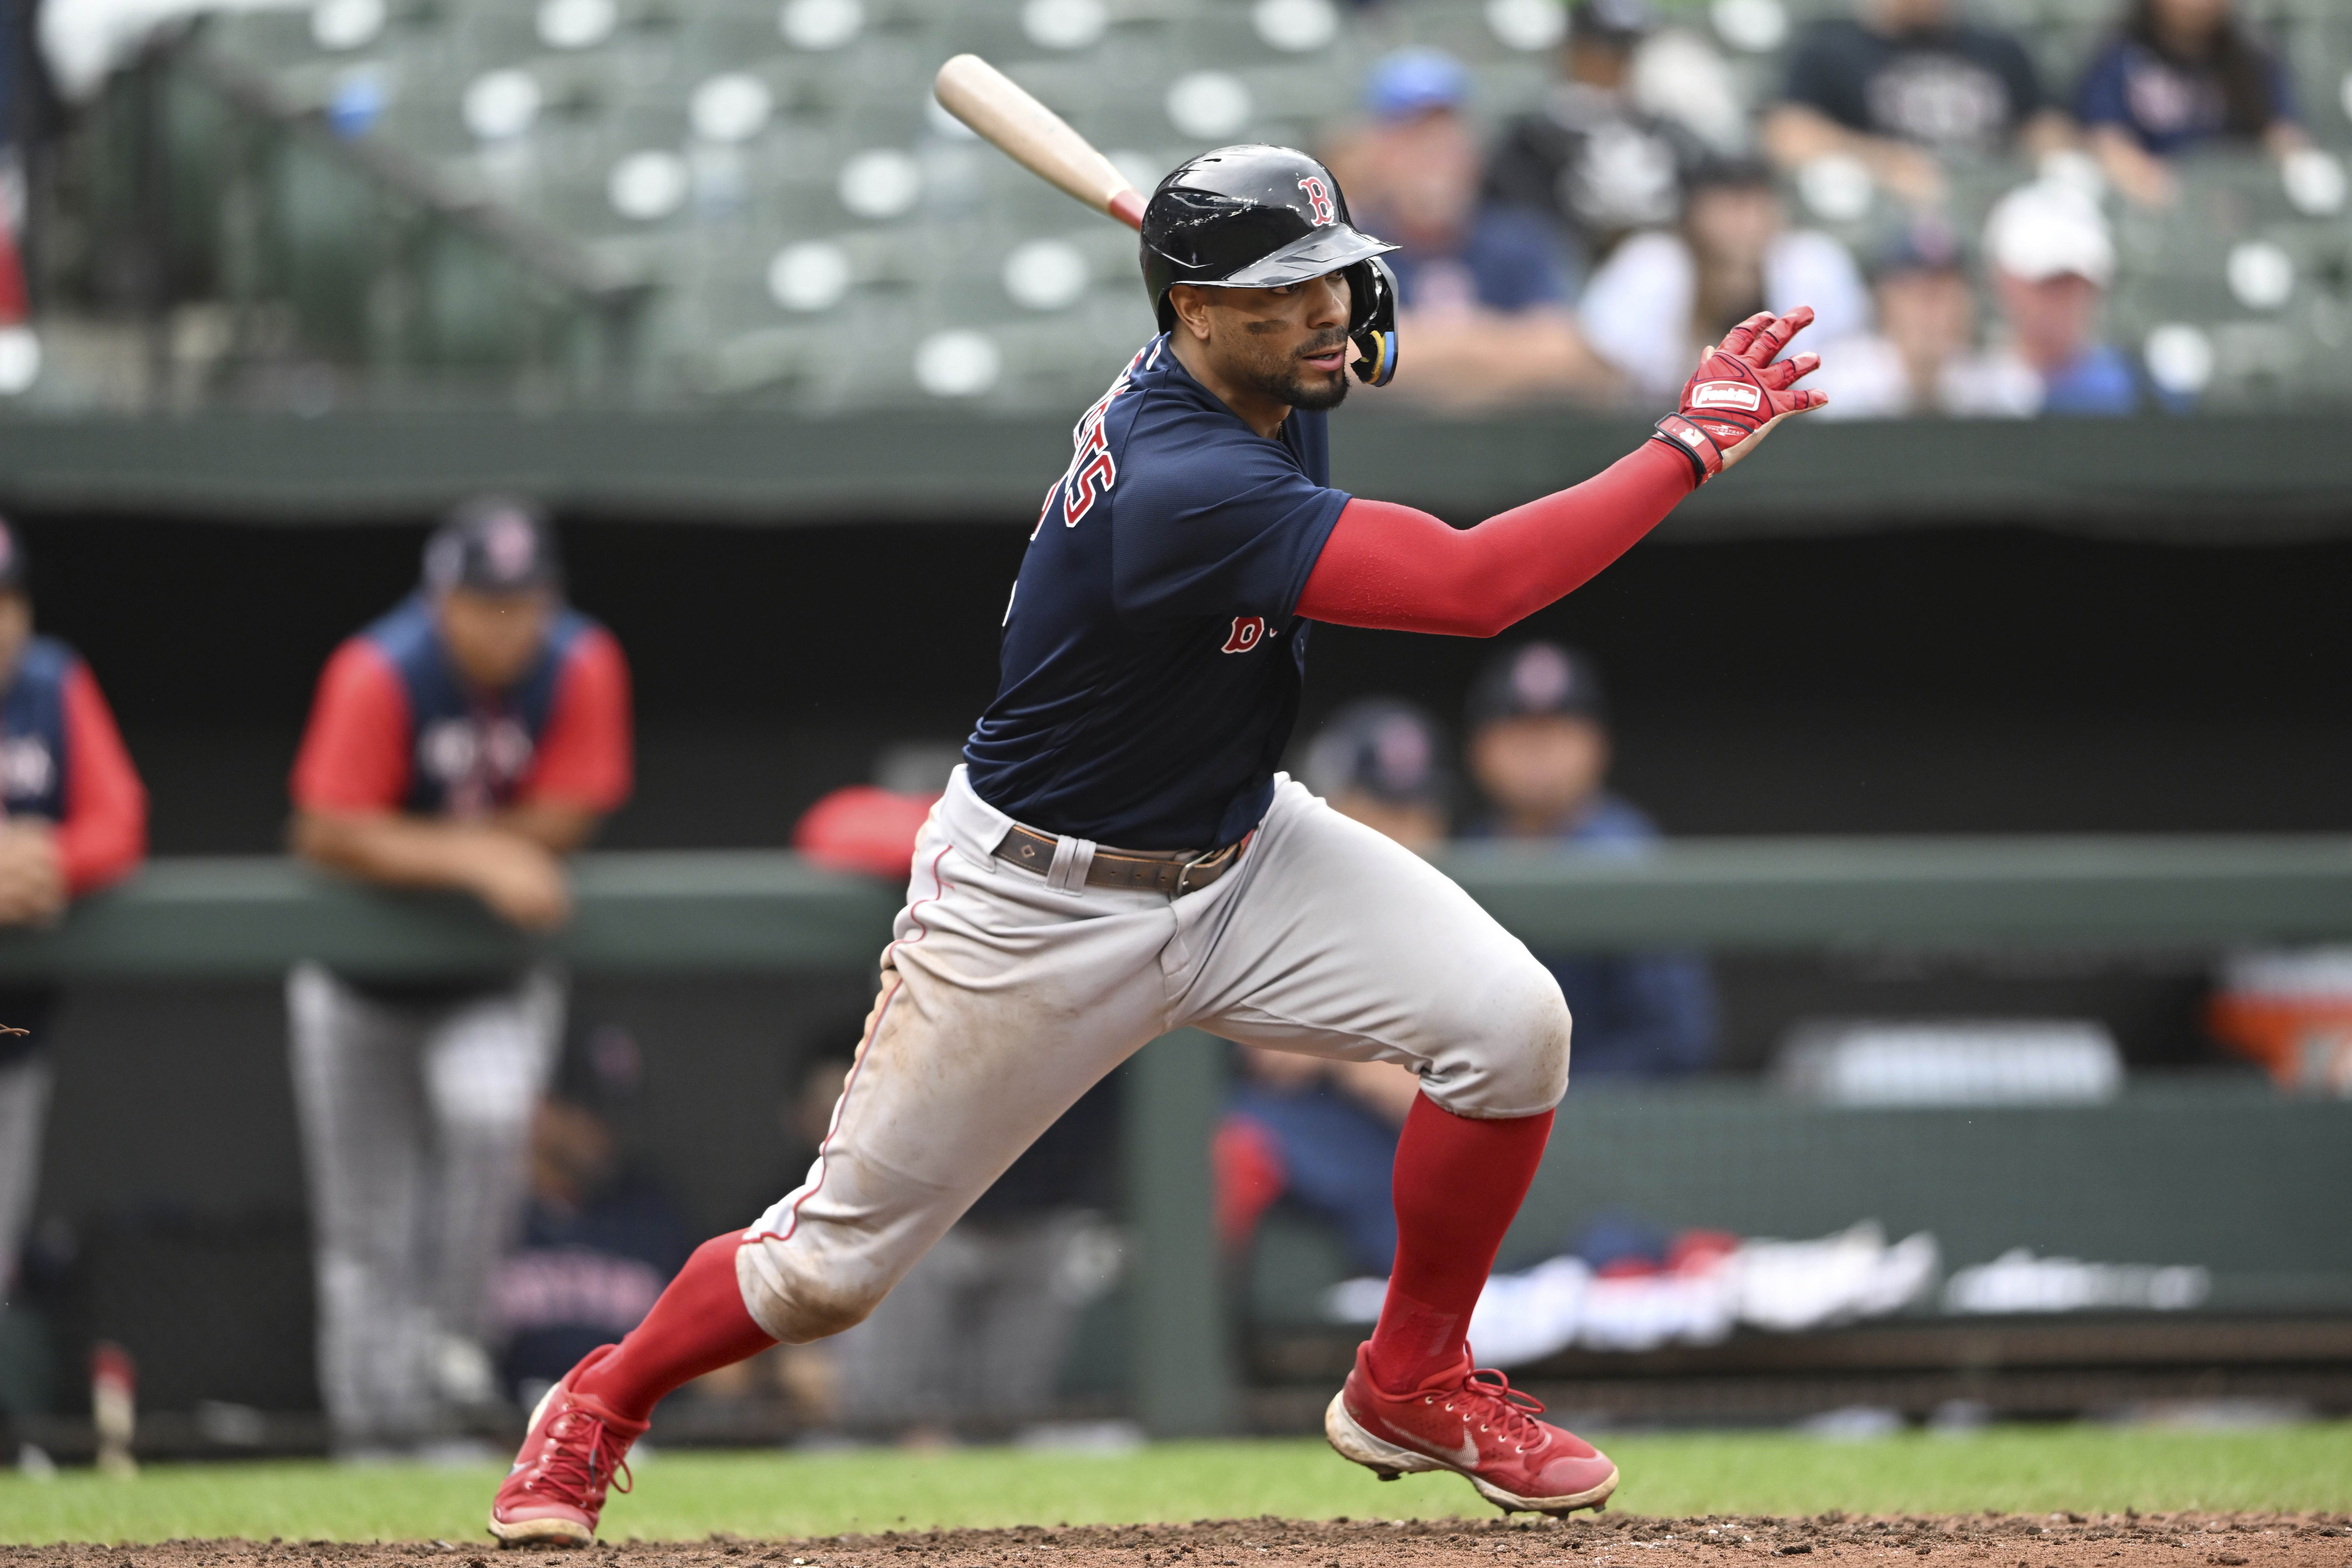 Chasing down a batting alt is helping Xander Bogaerts deal with